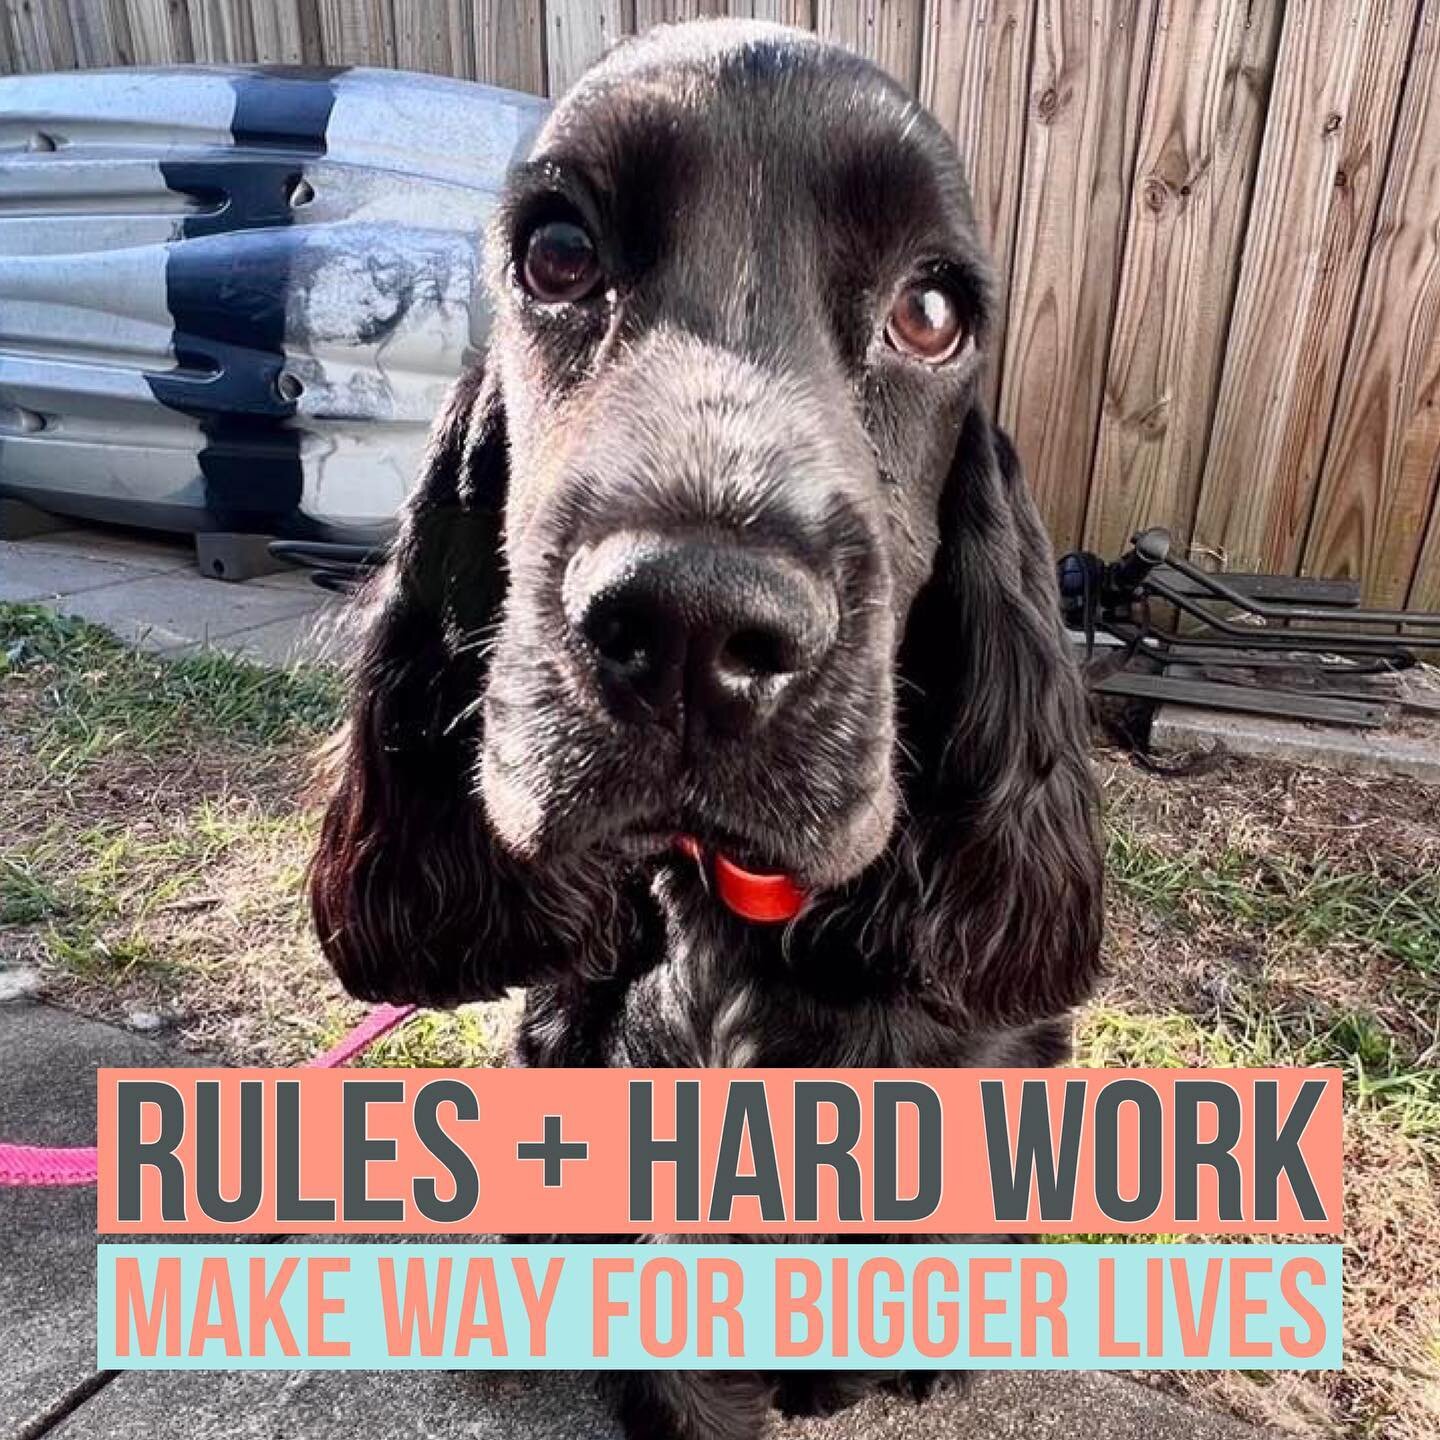 We ALL love our dogs! There&rsquo;s no doubt about this very fact. 

We ALL want nothing more than to include them on our daily errands or adventures as much as we can. I mean how cool would it be if we could take our dogs to work with us every day??